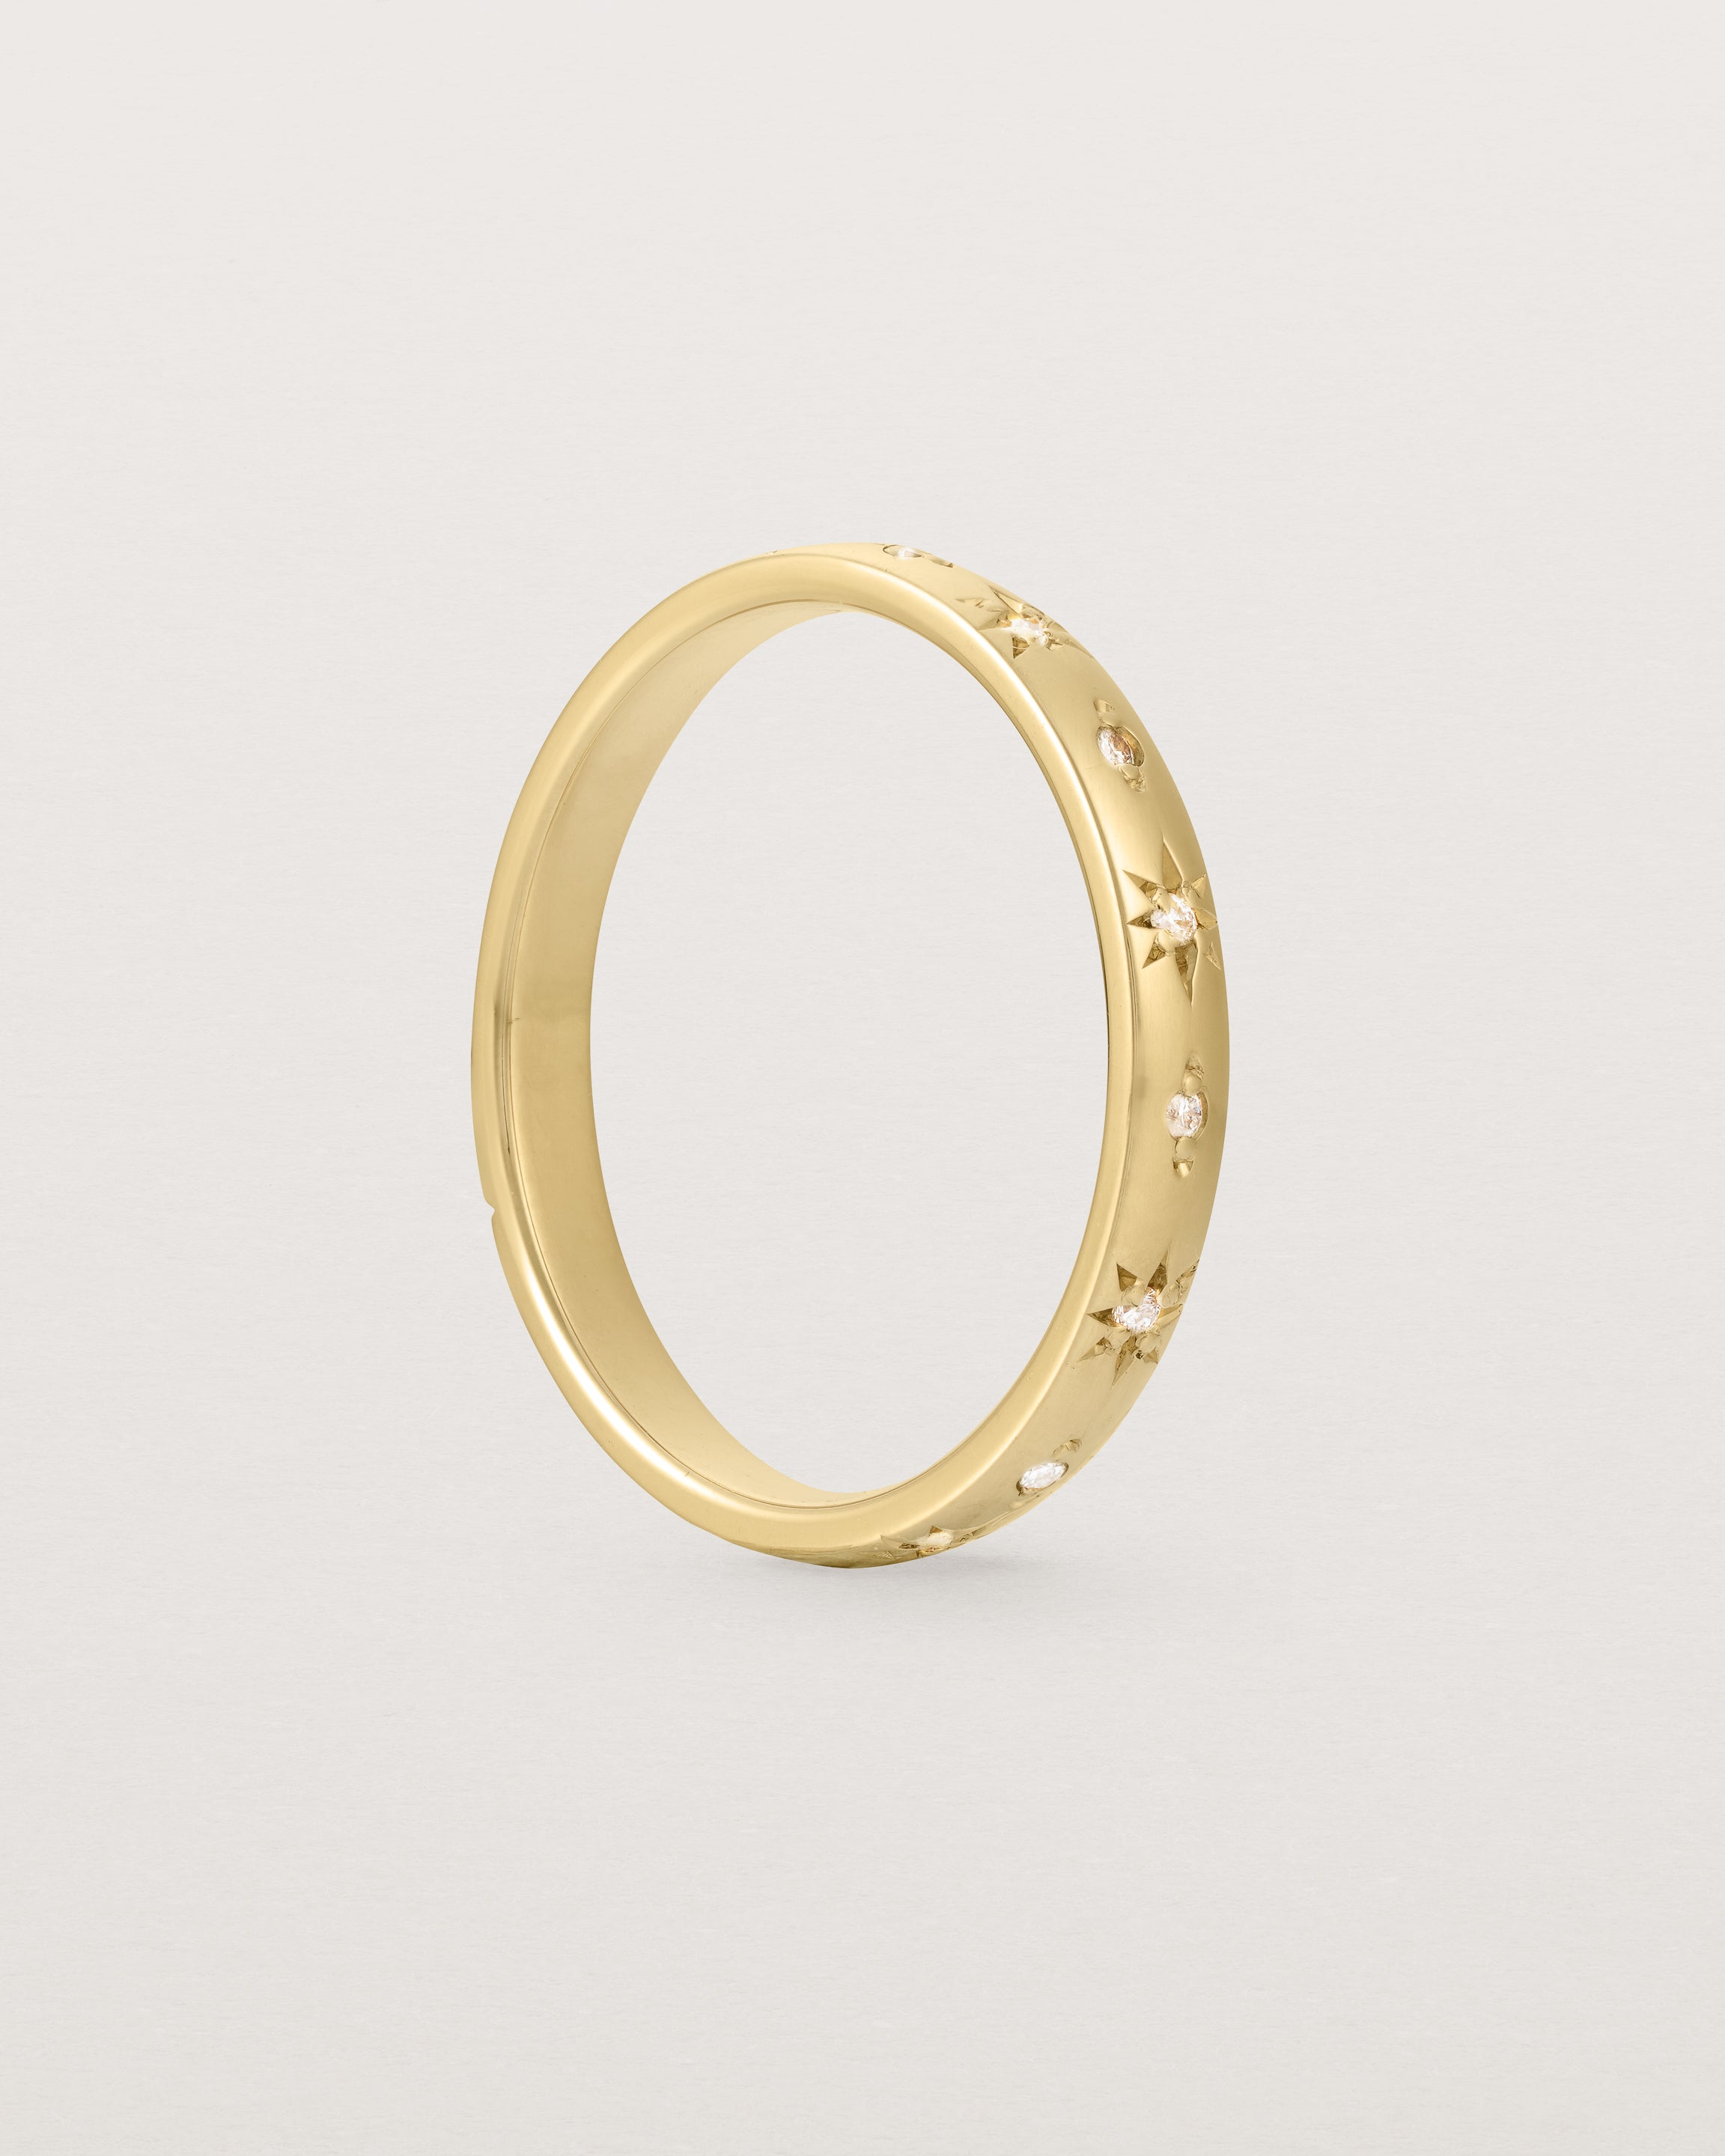 Standing view of the Leilani Ring | Diamonds | Yellow Gold. 